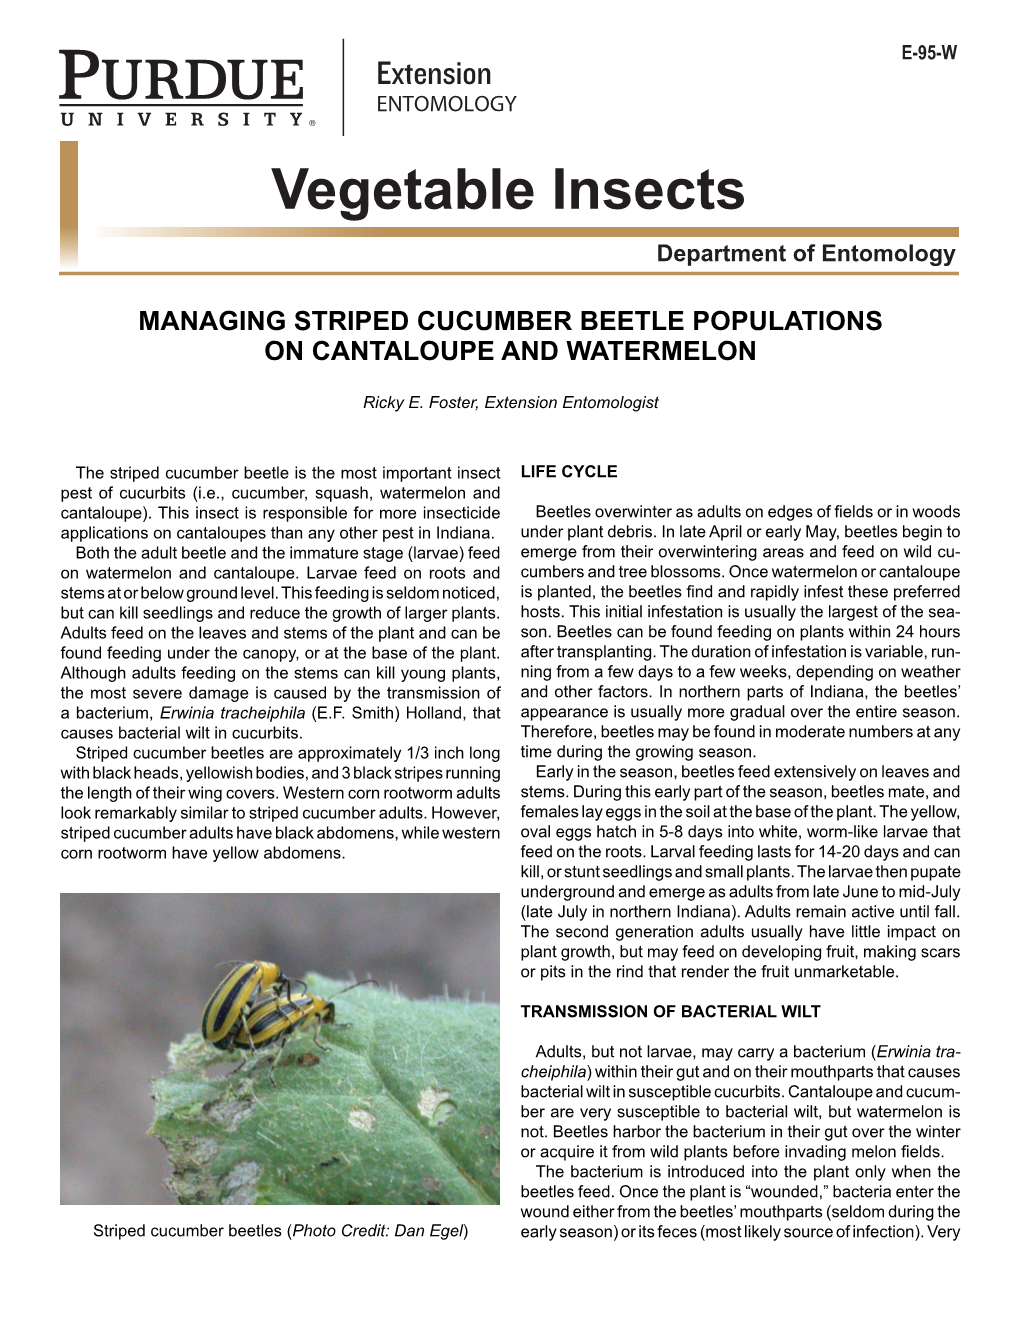 Vegetable Insects Department of Entomology